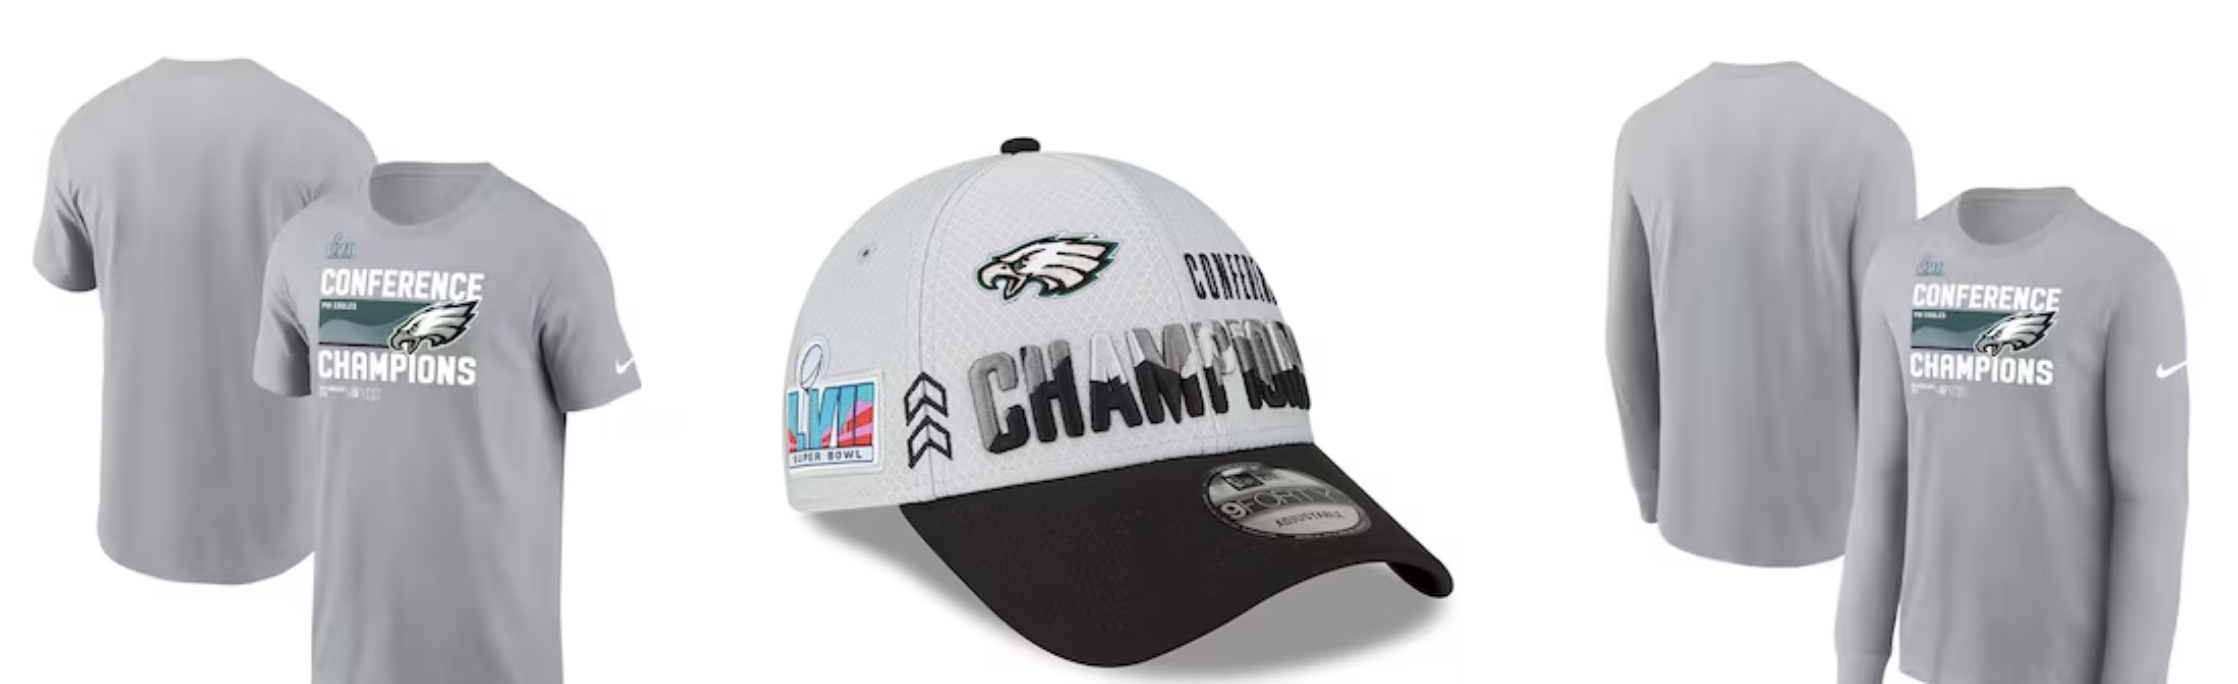 Eagles NFC Champions: Where to buy Eagles NFC Championship gear online 